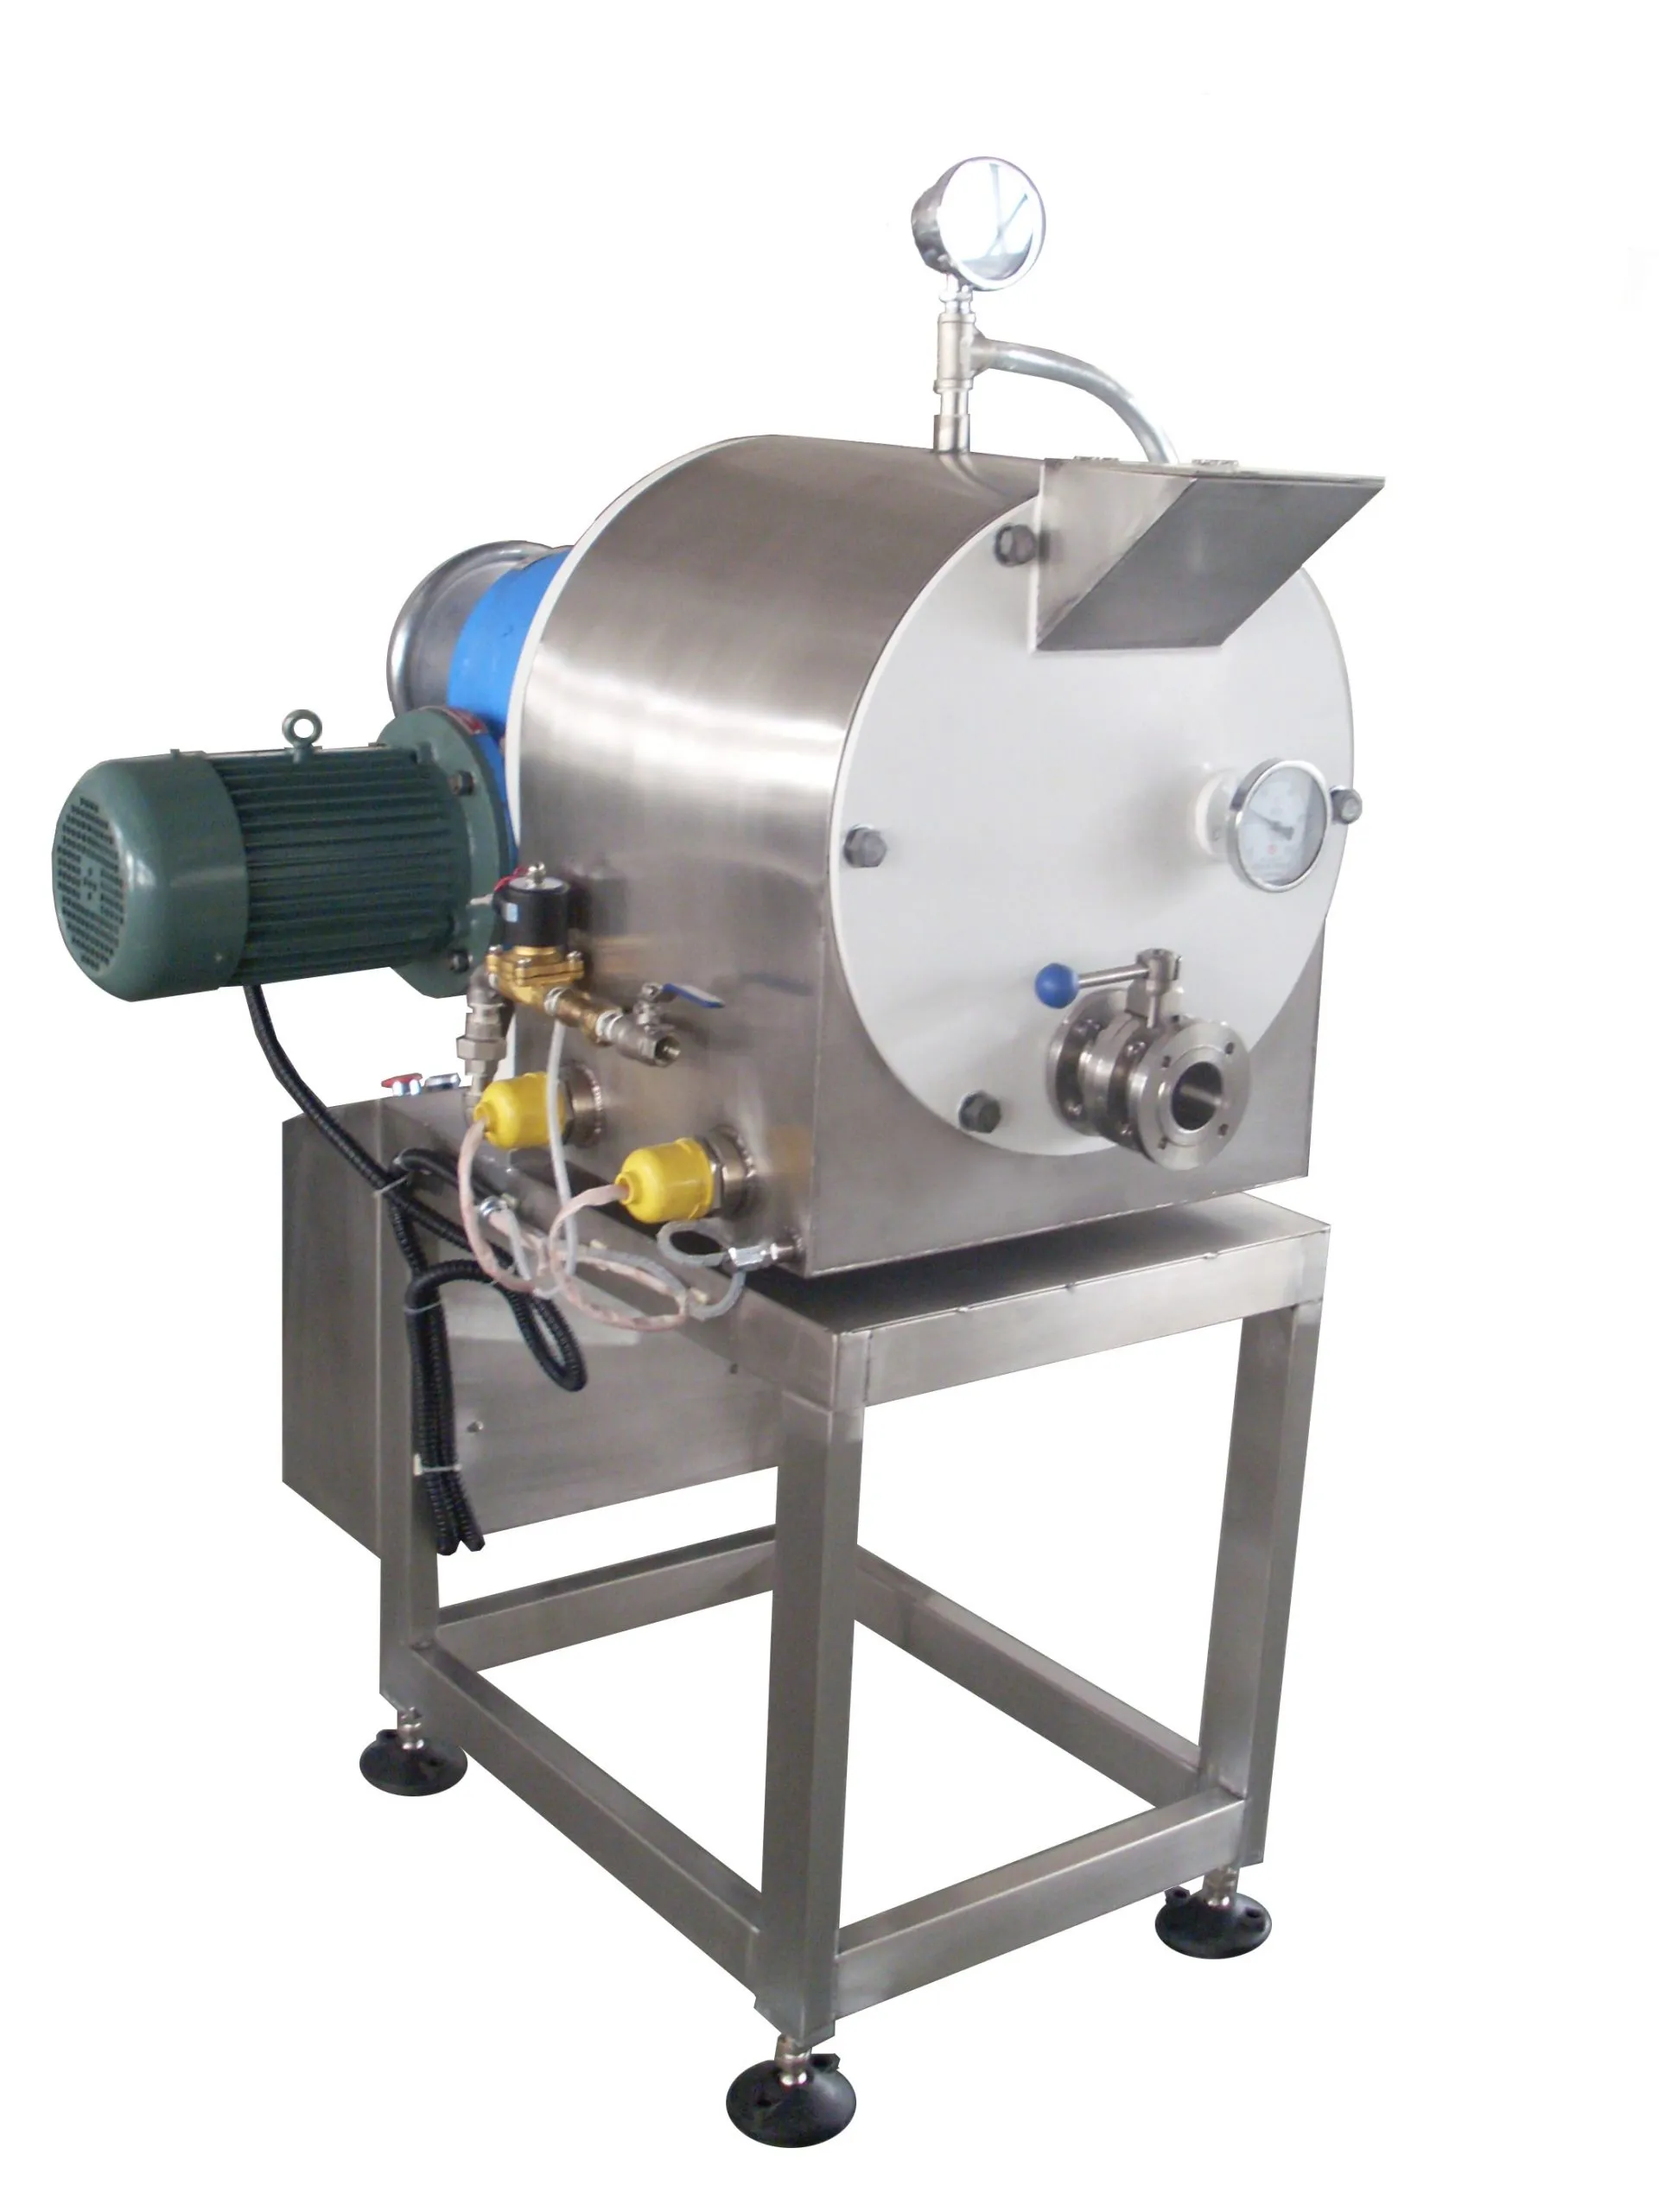 Premier Chocolate Refiner - Upgraded for Chocolate Making